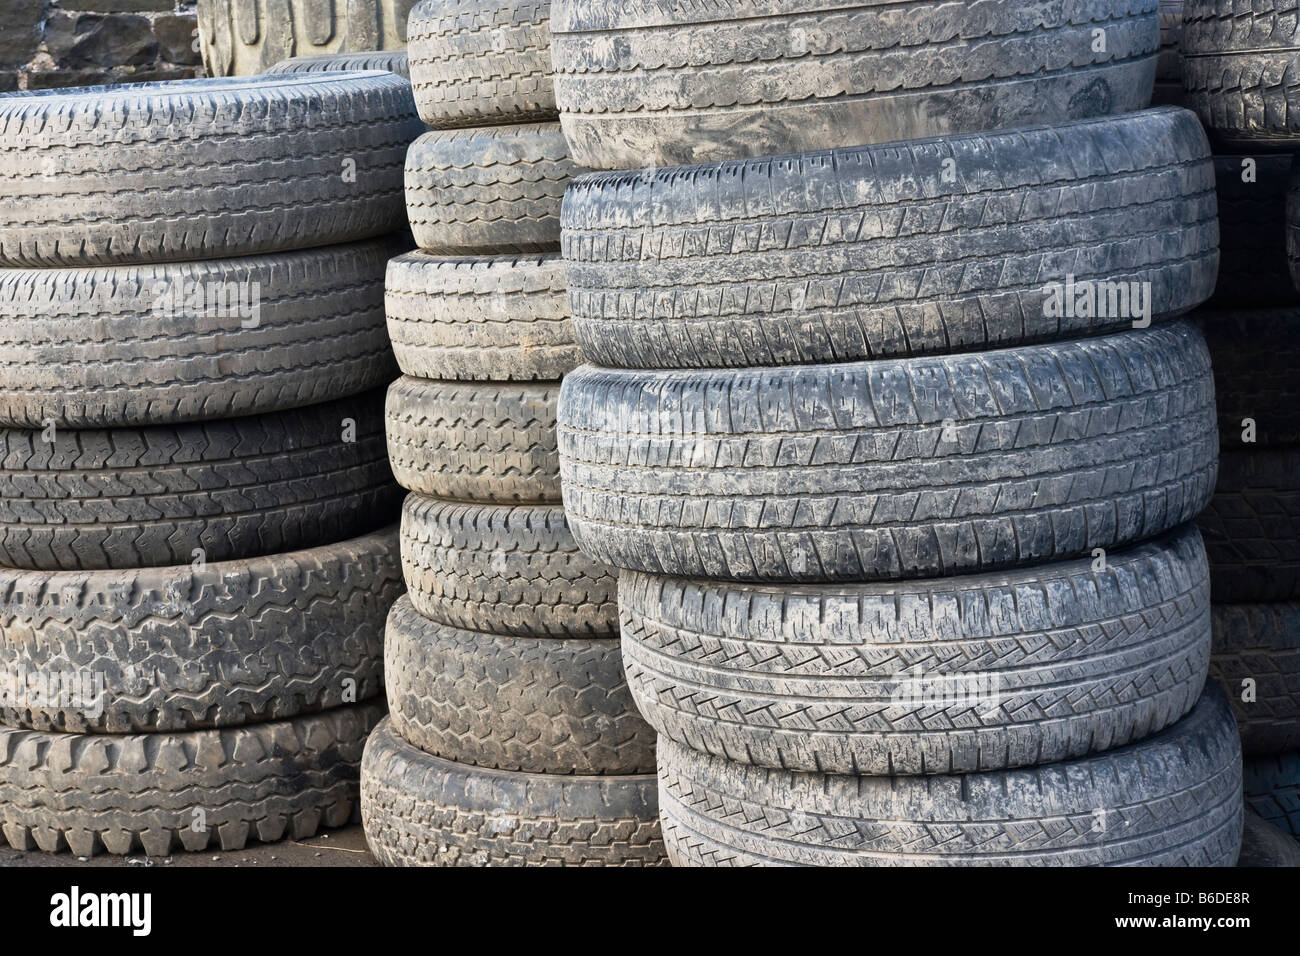 old tyres awaiting disposal or recycling Stock Photo